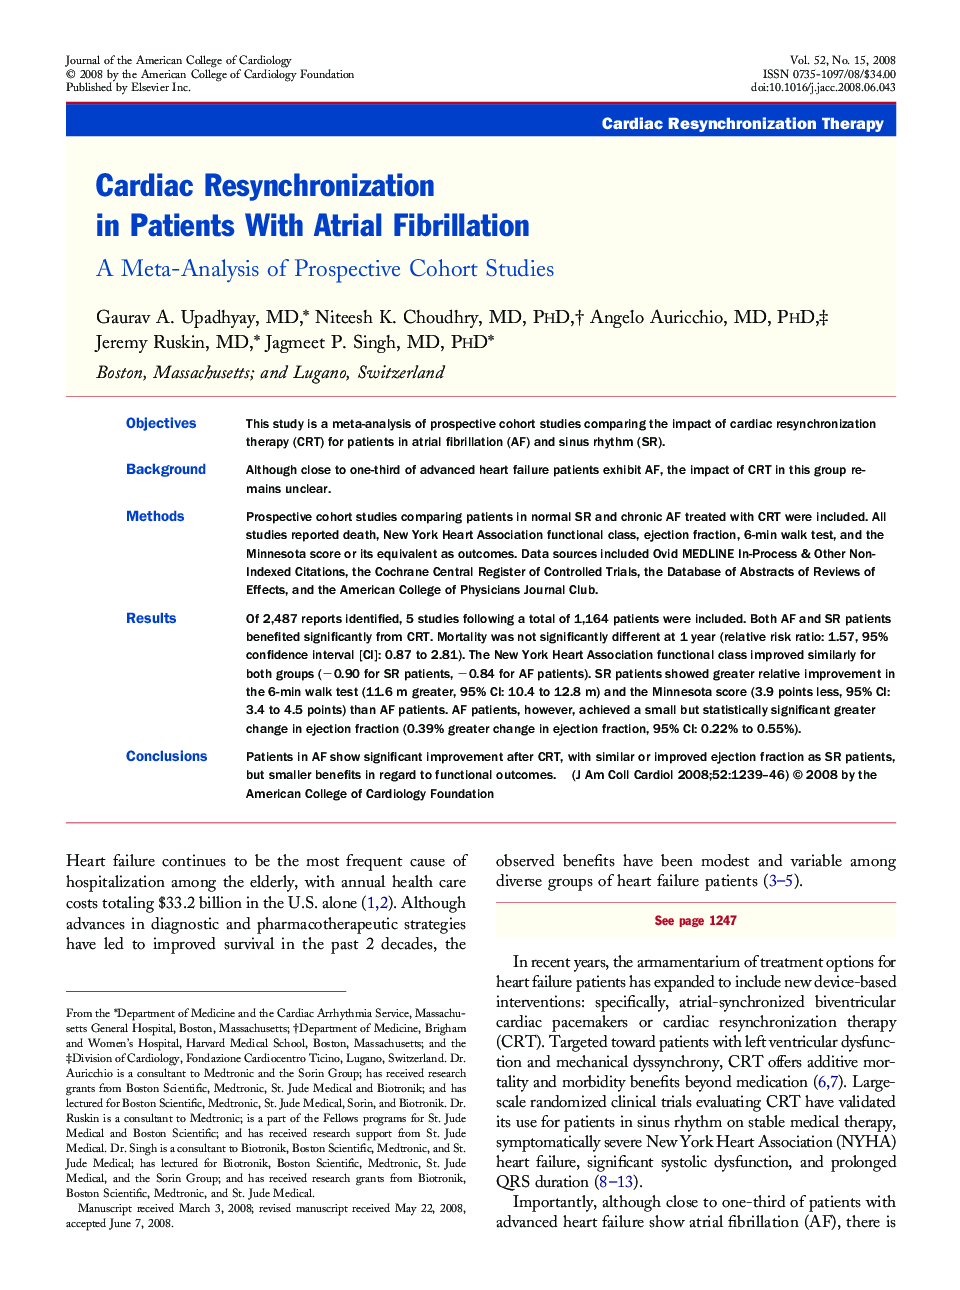 Cardiac Resynchronization in Patients With Atrial Fibrillation : A Meta-Analysis of Prospective Cohort Studies